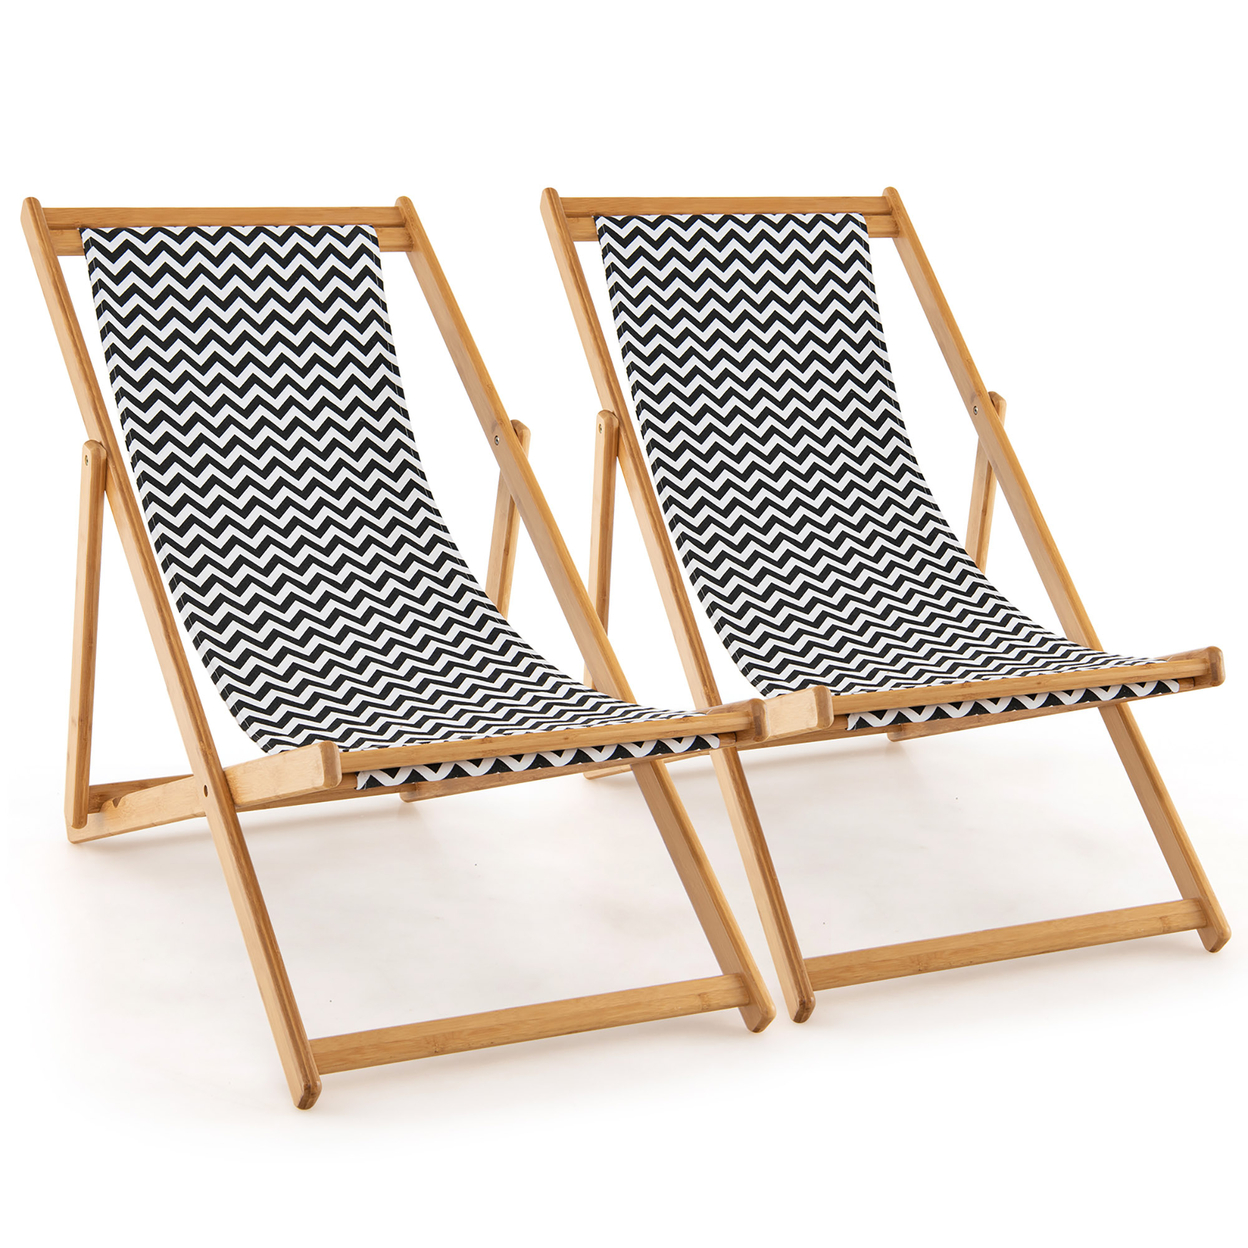 2pcs Foldable Patio Sling Chair W/ Solid Bamboo Frame & Breathable Canvas Seat Beach, Garden, Patio